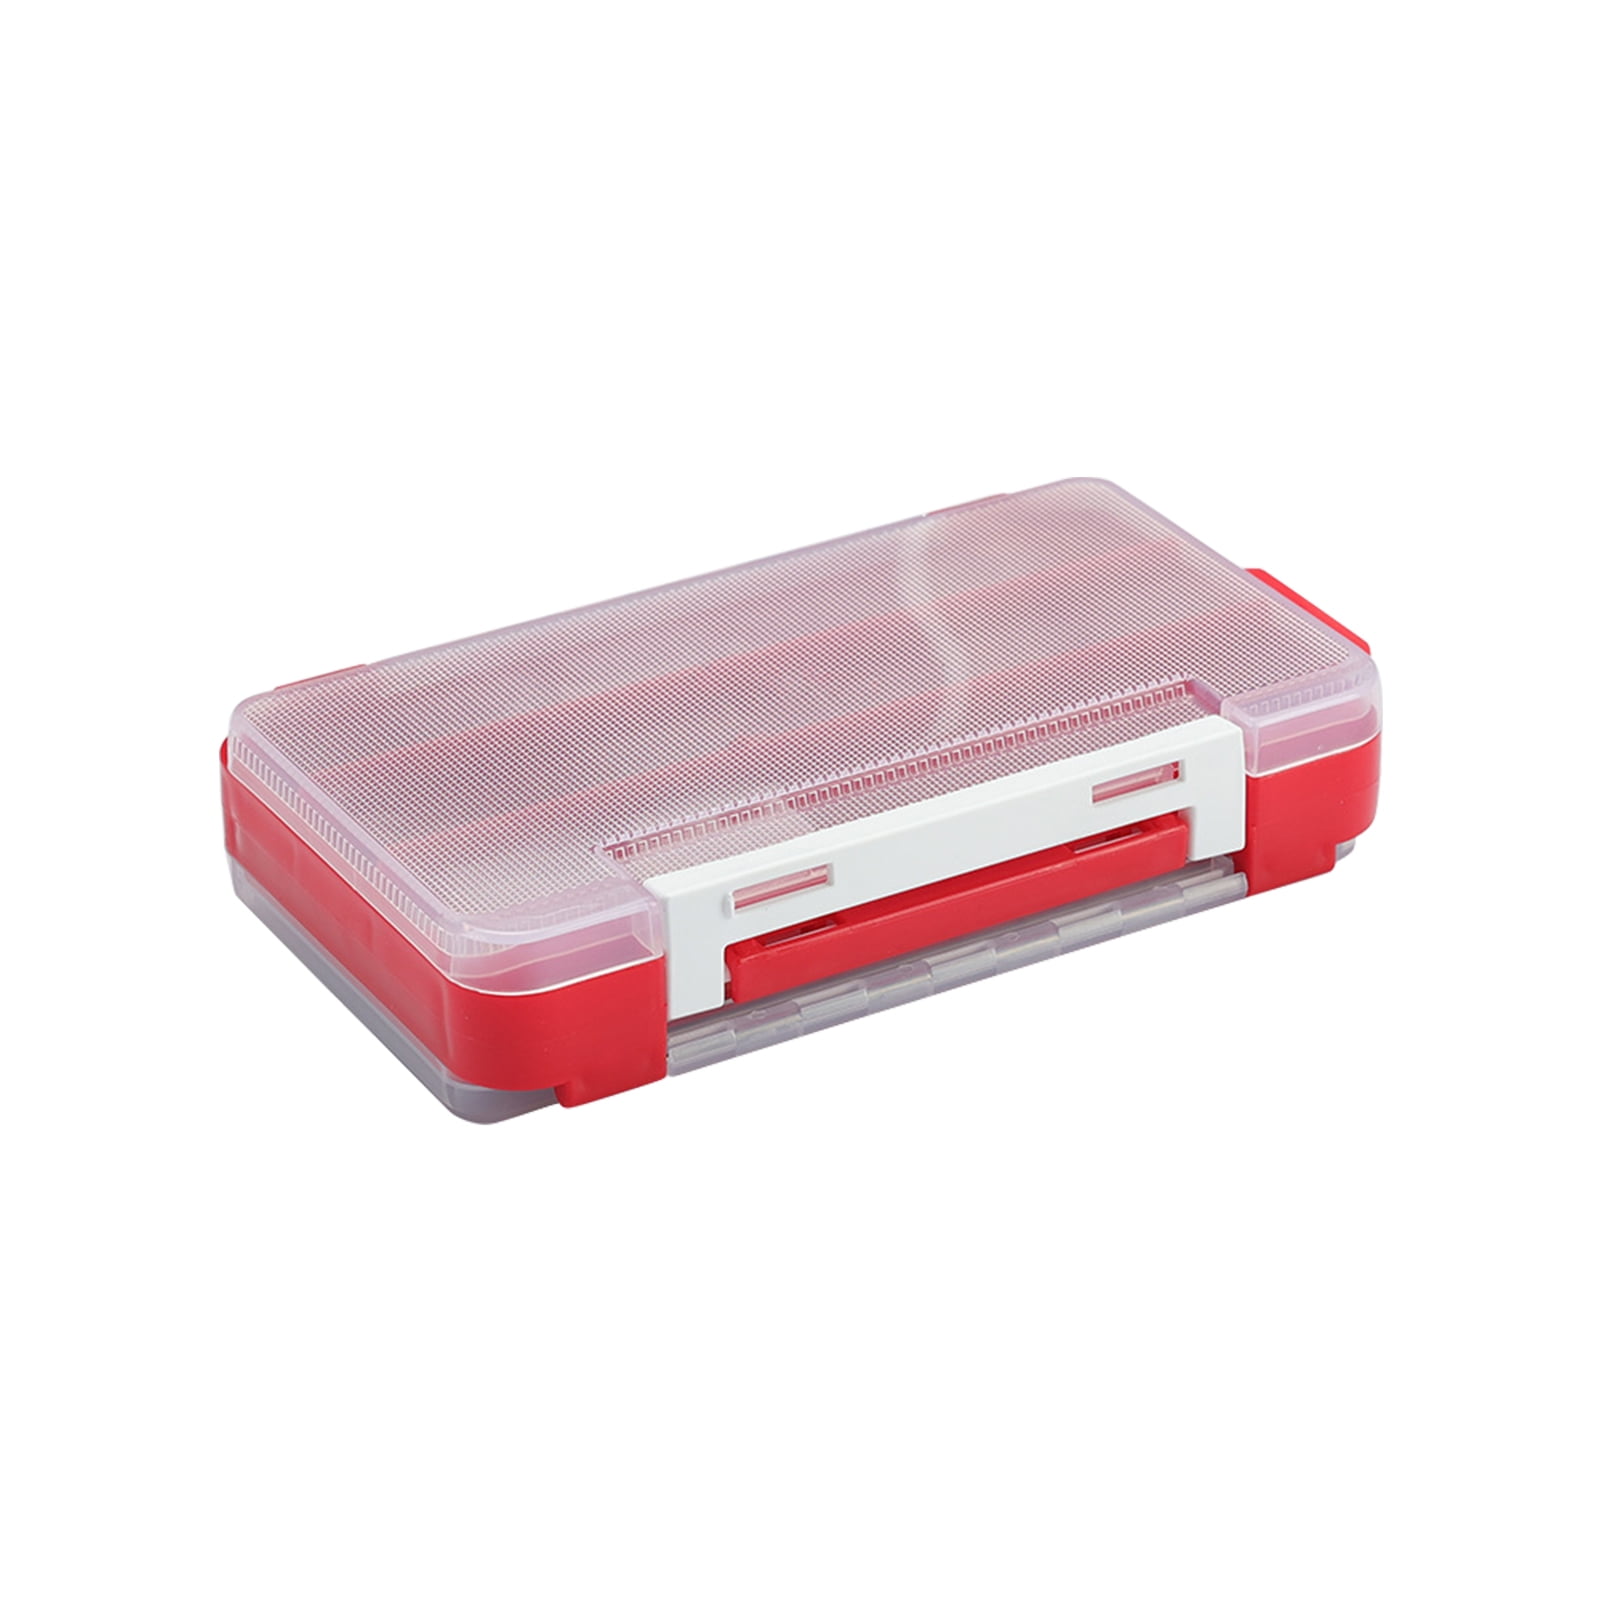 Uxwuy Snackle Box Charcuterie Container Tackle Box Organizer Plastic Clear Tackle Box for Snacks Beads Organizer Art Craft Storage Compartment Box